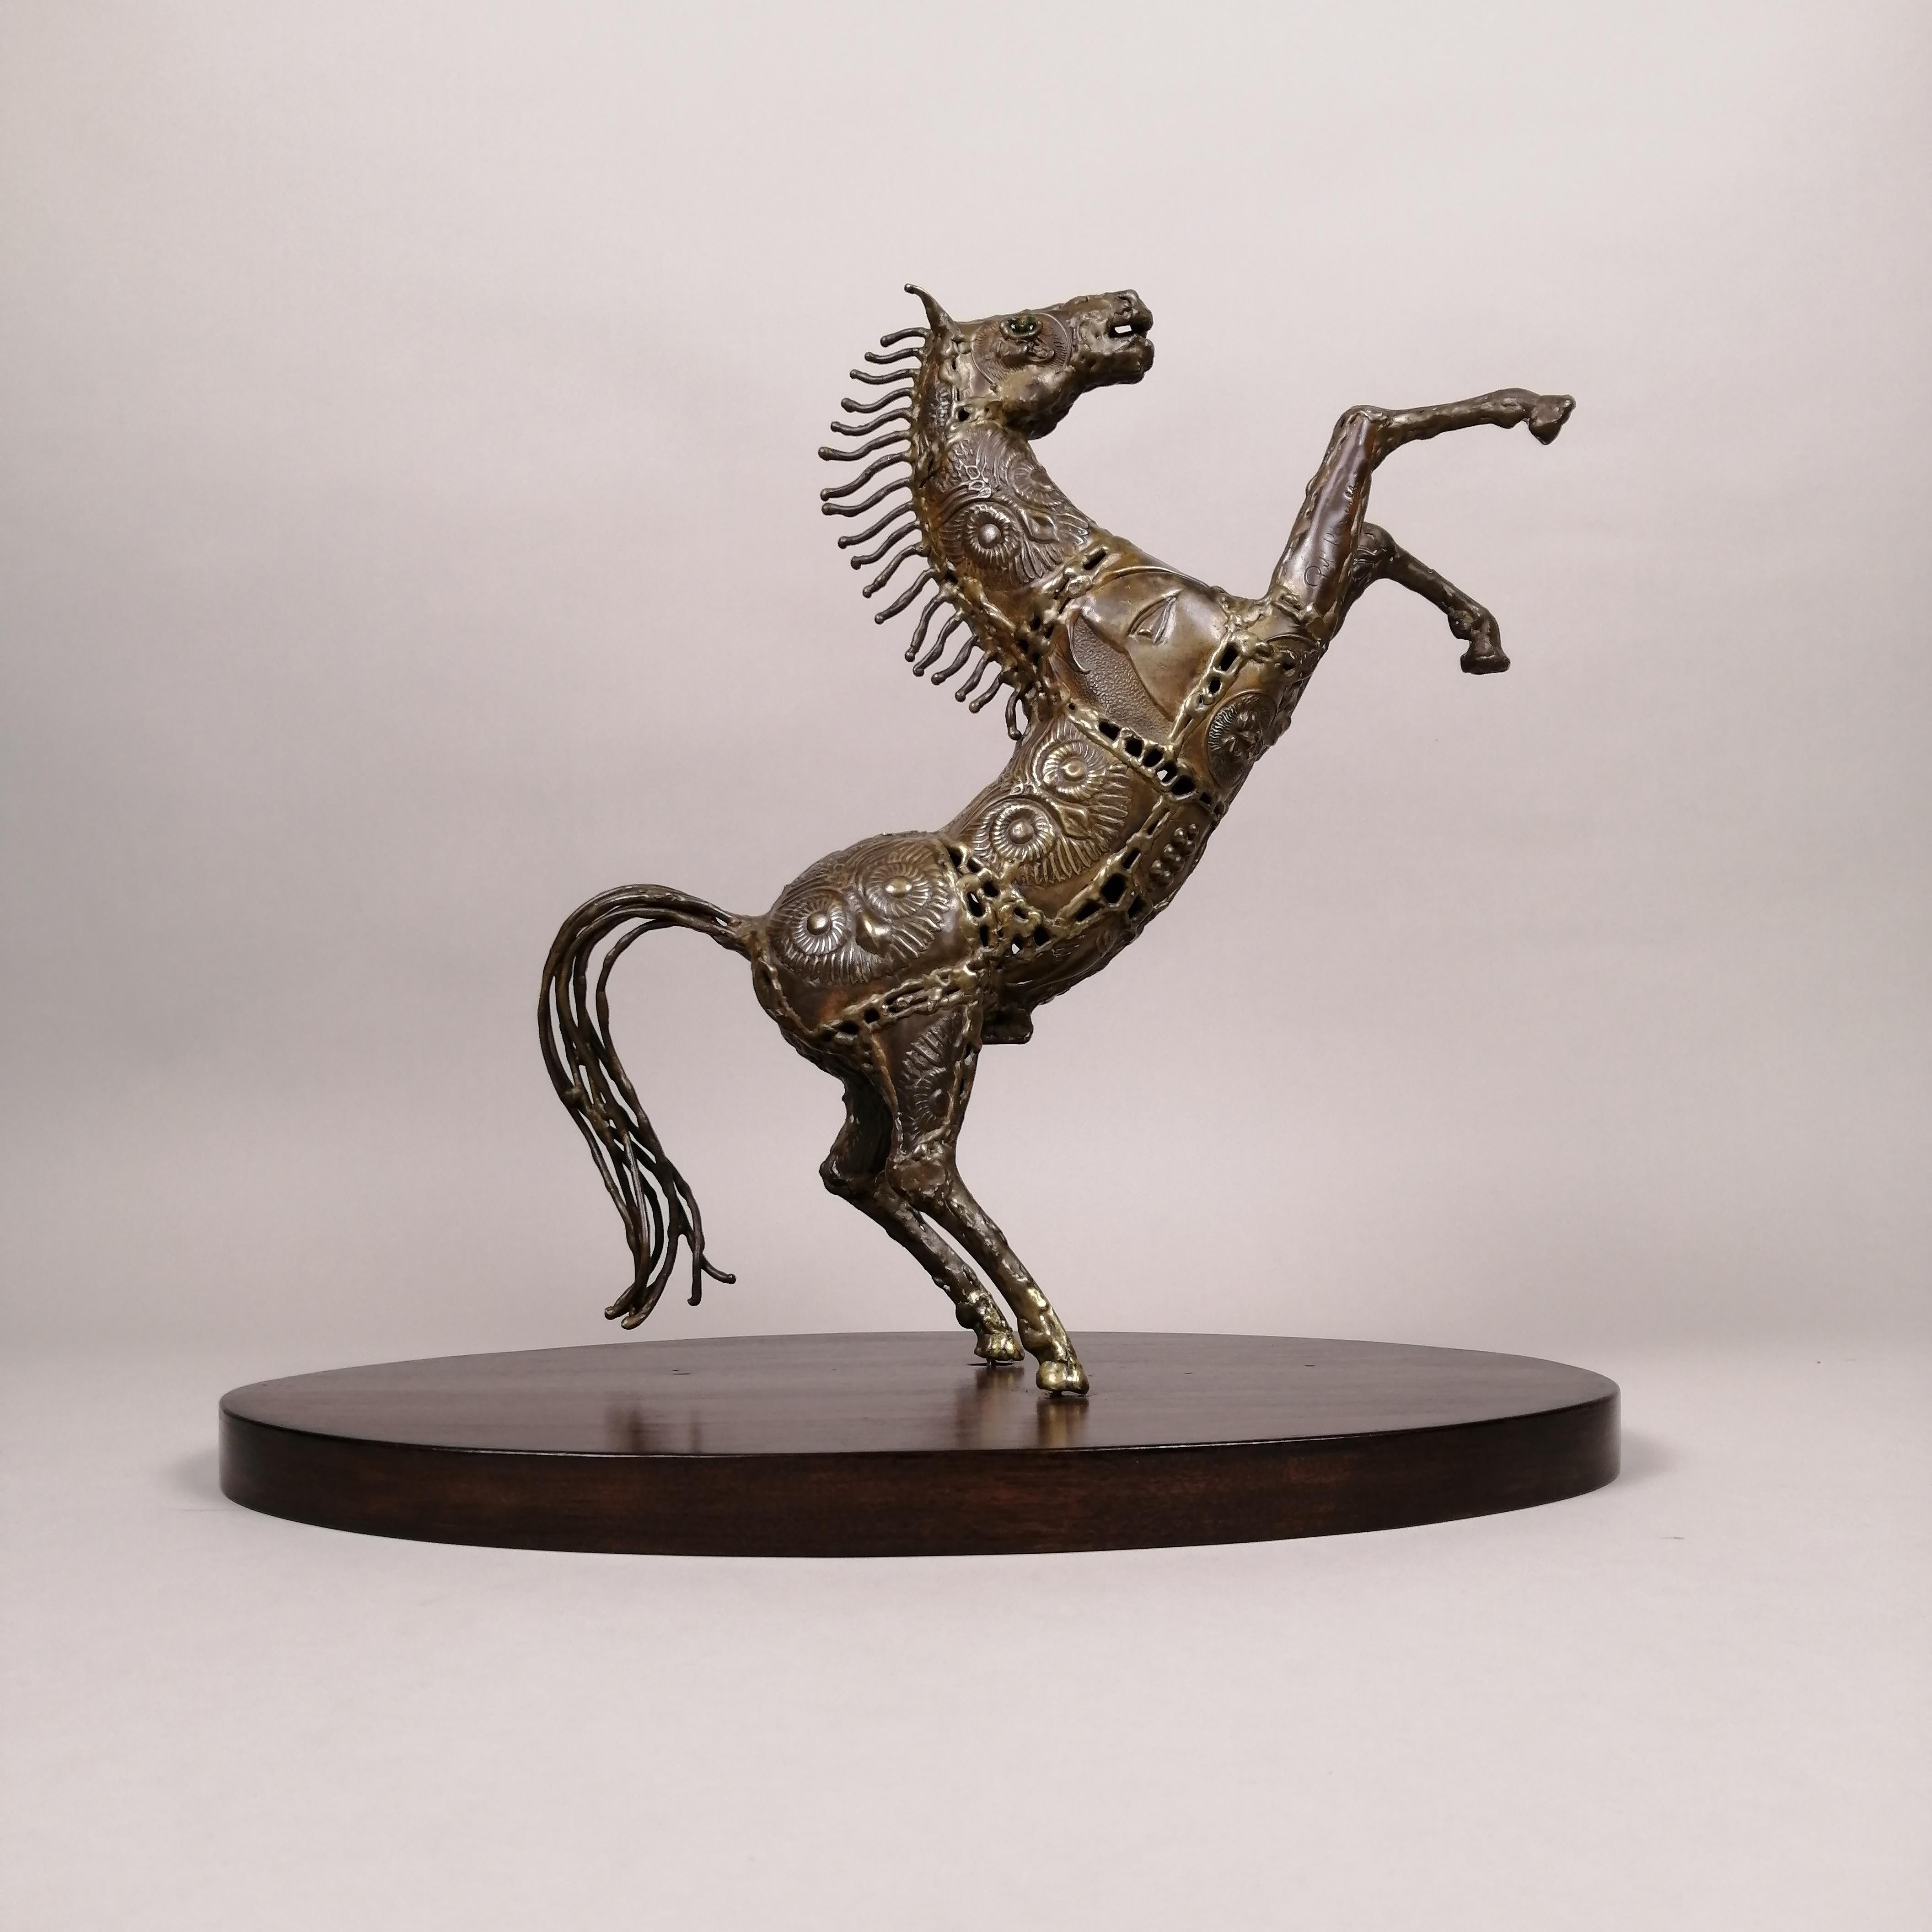 A ca. 1980 Mexican Brutalist bronze rampant horse sculpture by Hungarian-born sculptor Pal Kepenyes. The horse's body show reliefs with lions and owl's heads. The sculpture is mounted over a walnut oval base. Signed on front right leg. 

Sculpture's